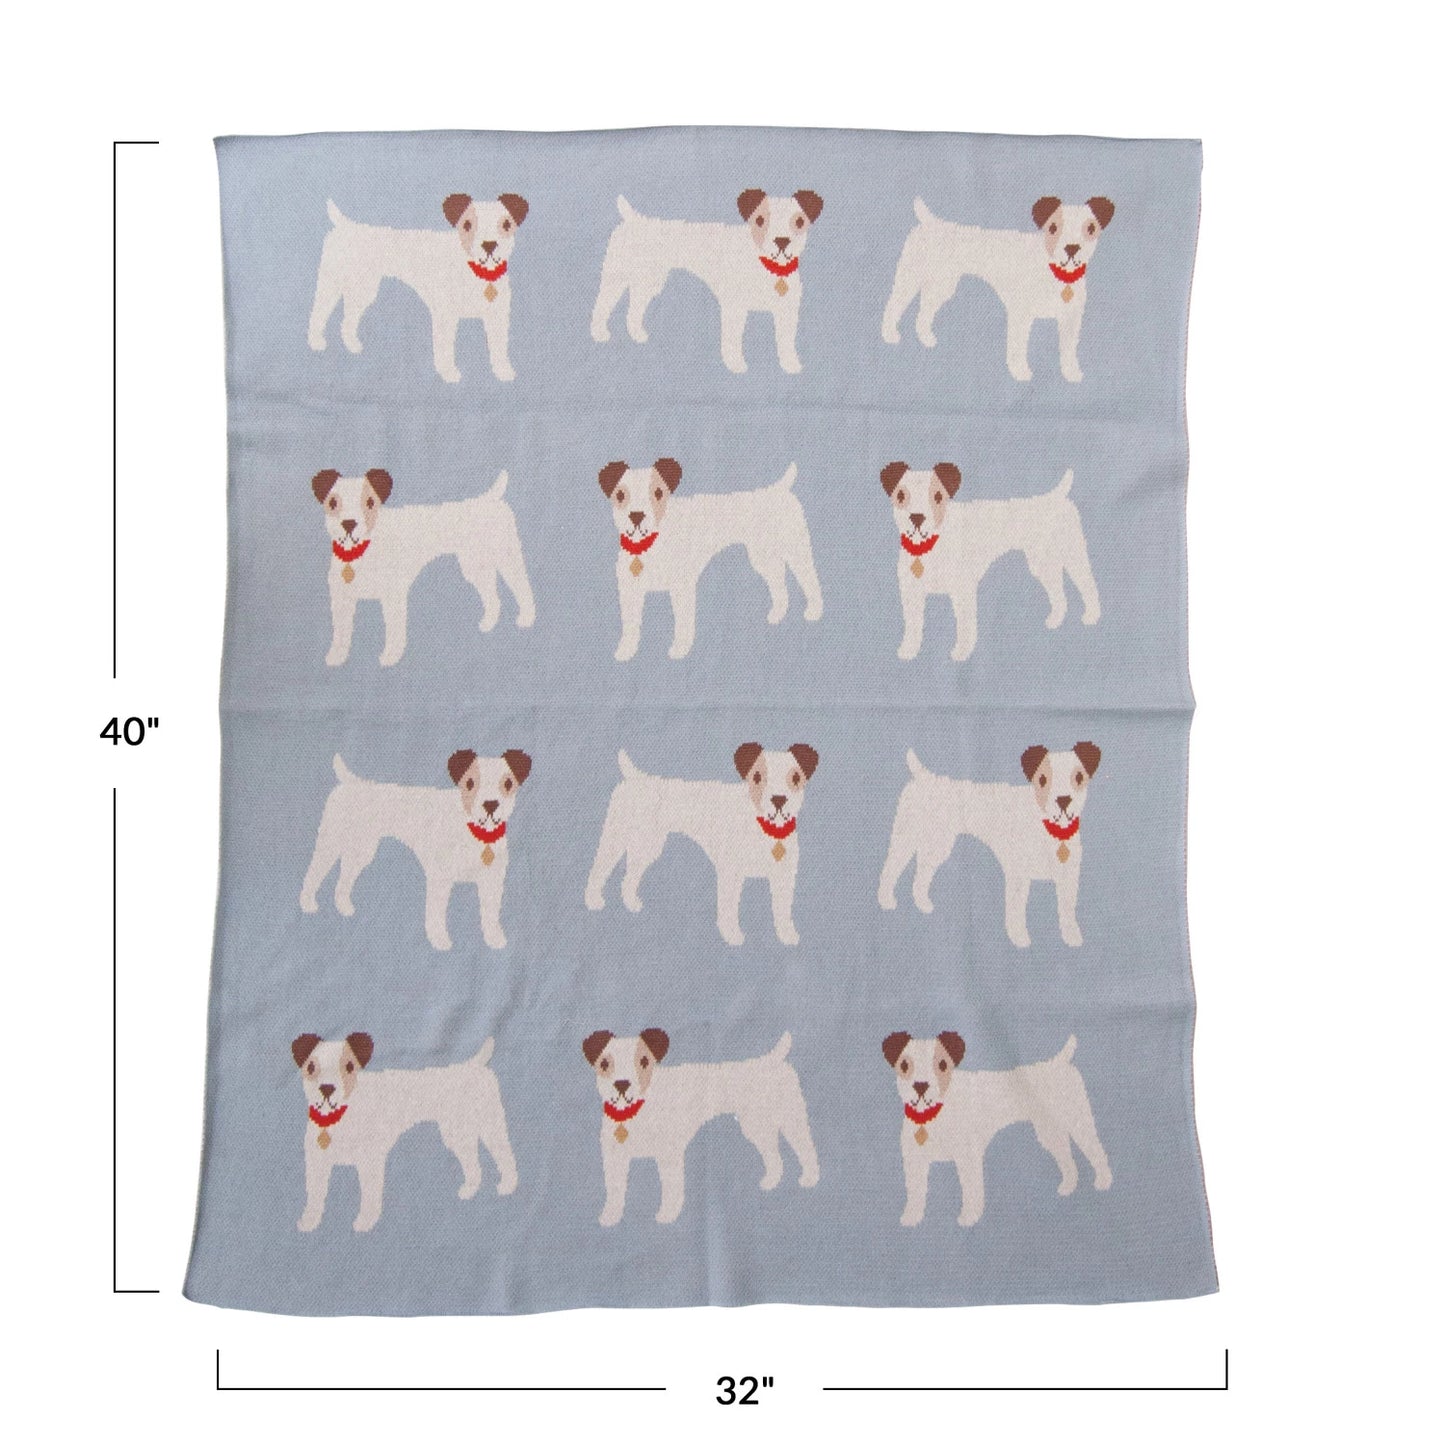 Cotton Knit Blanket with Dogs